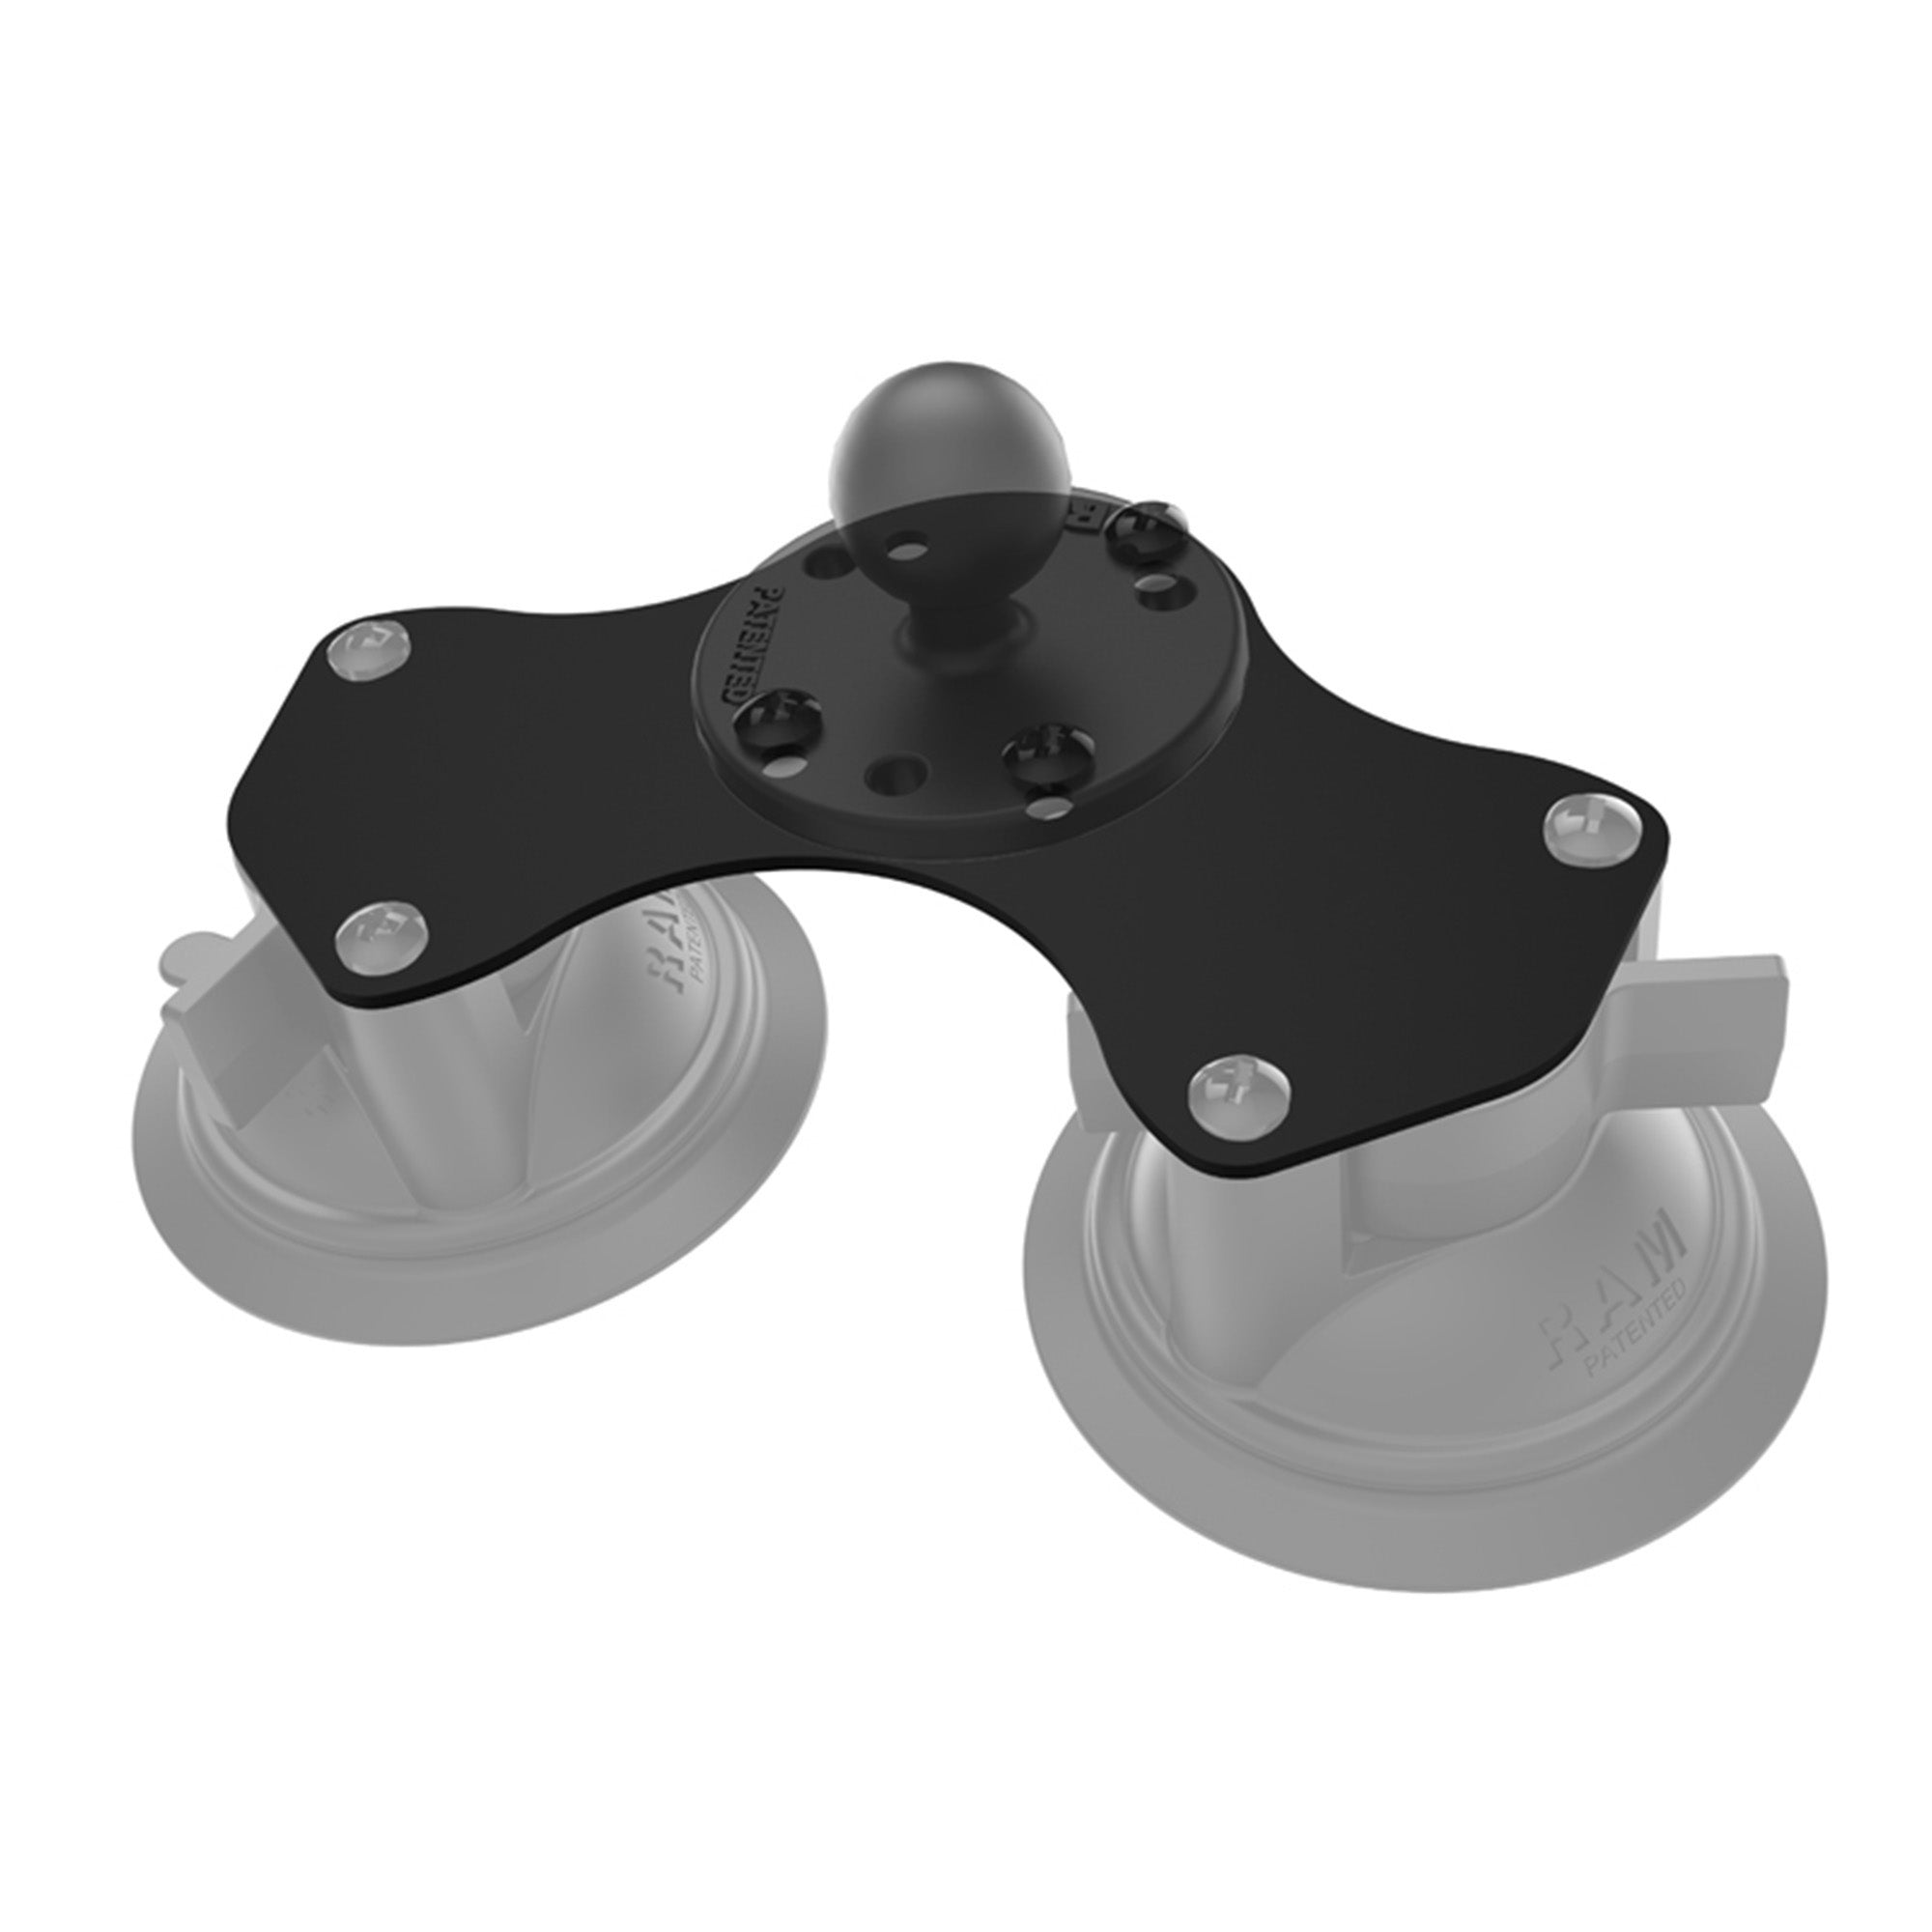 RAM Dual Adapter Plate for Twist-Lock Suction Cups